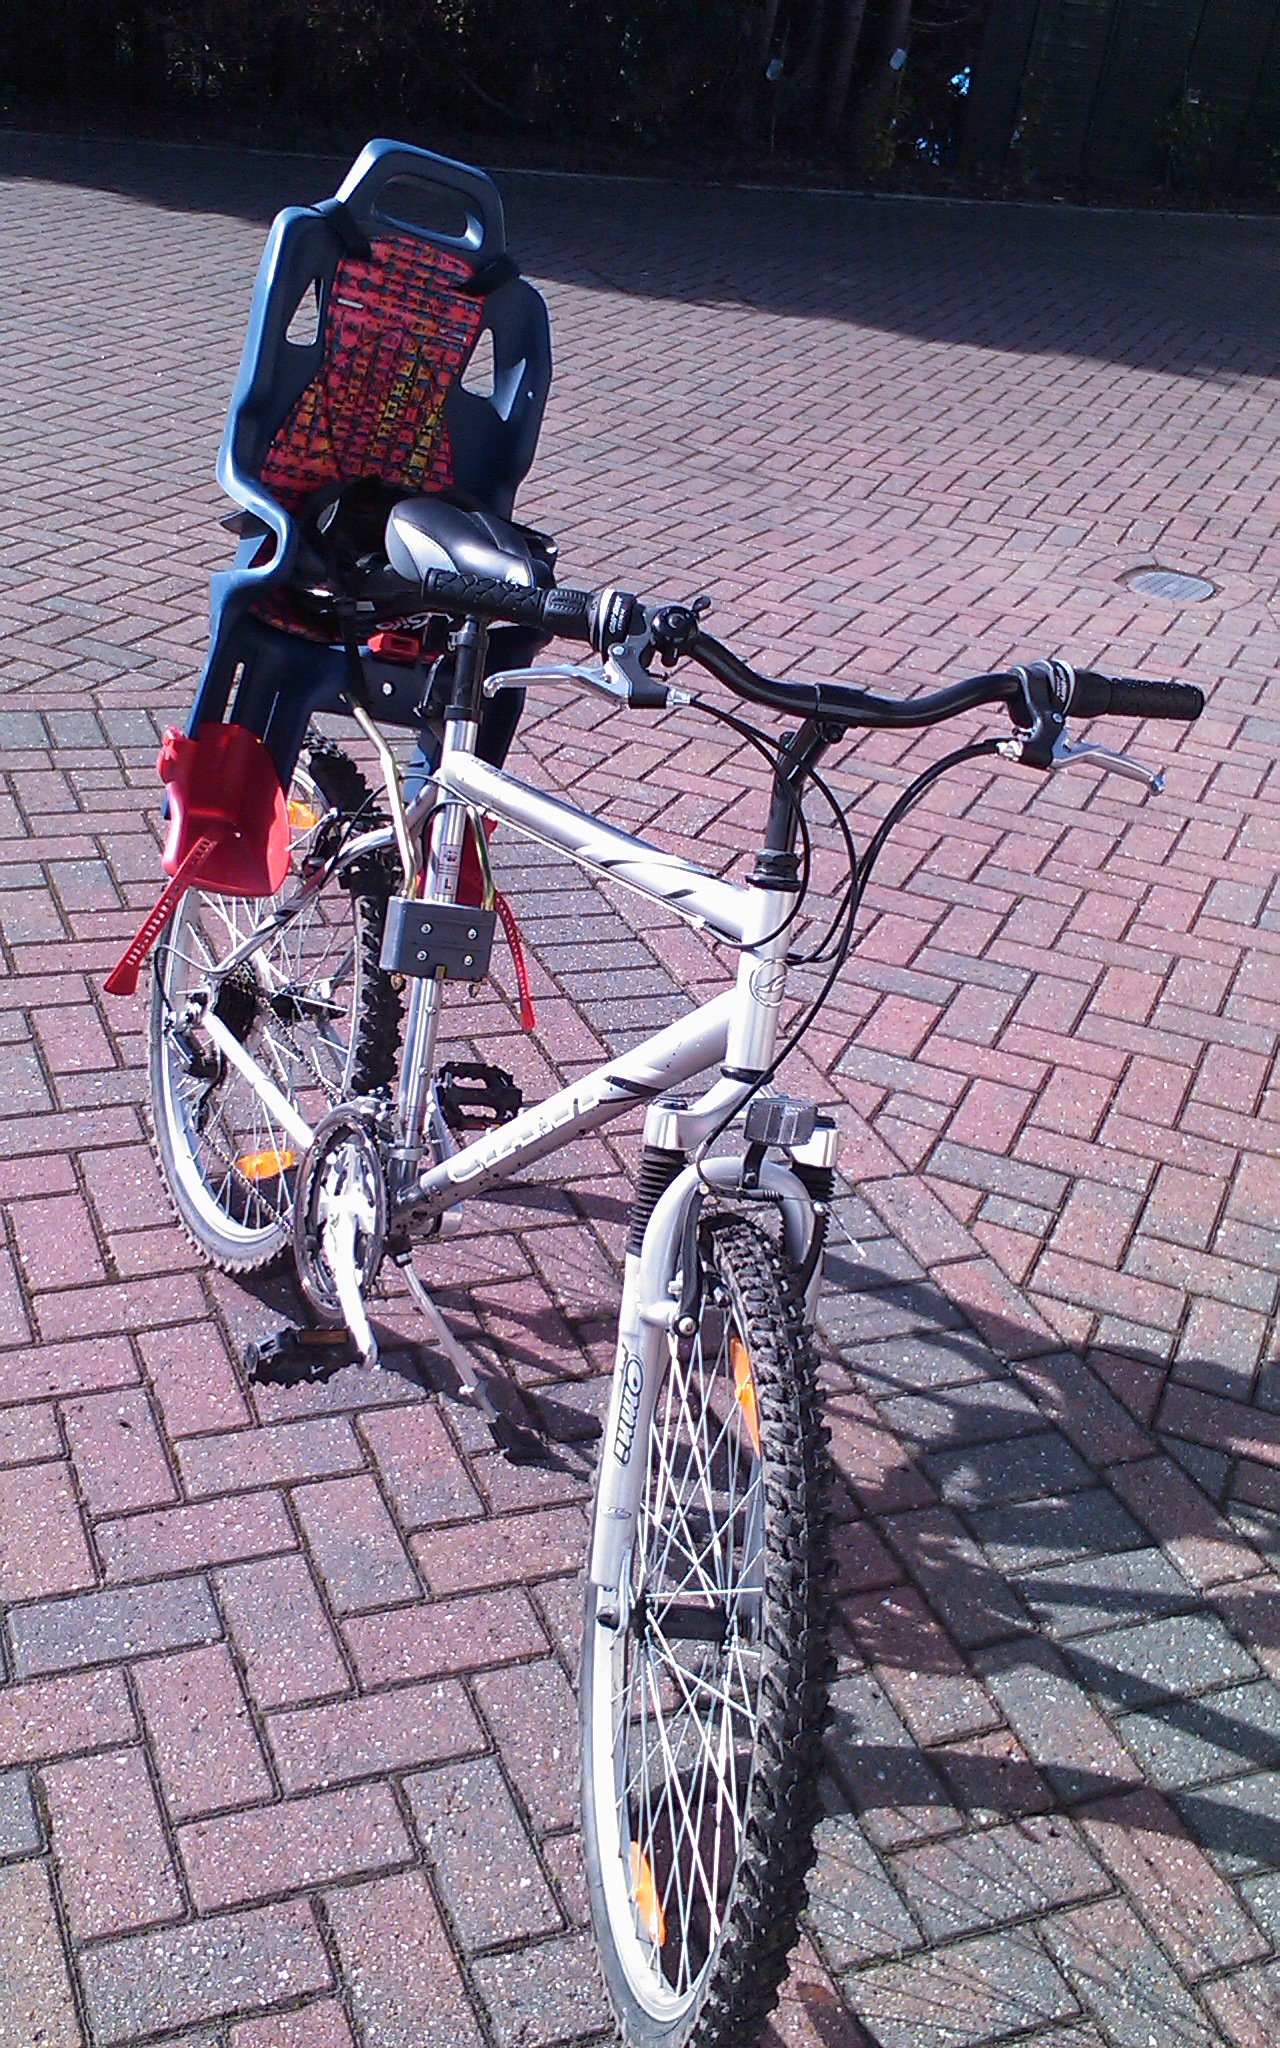 the bicycle is in an unpaved position on a red brick street